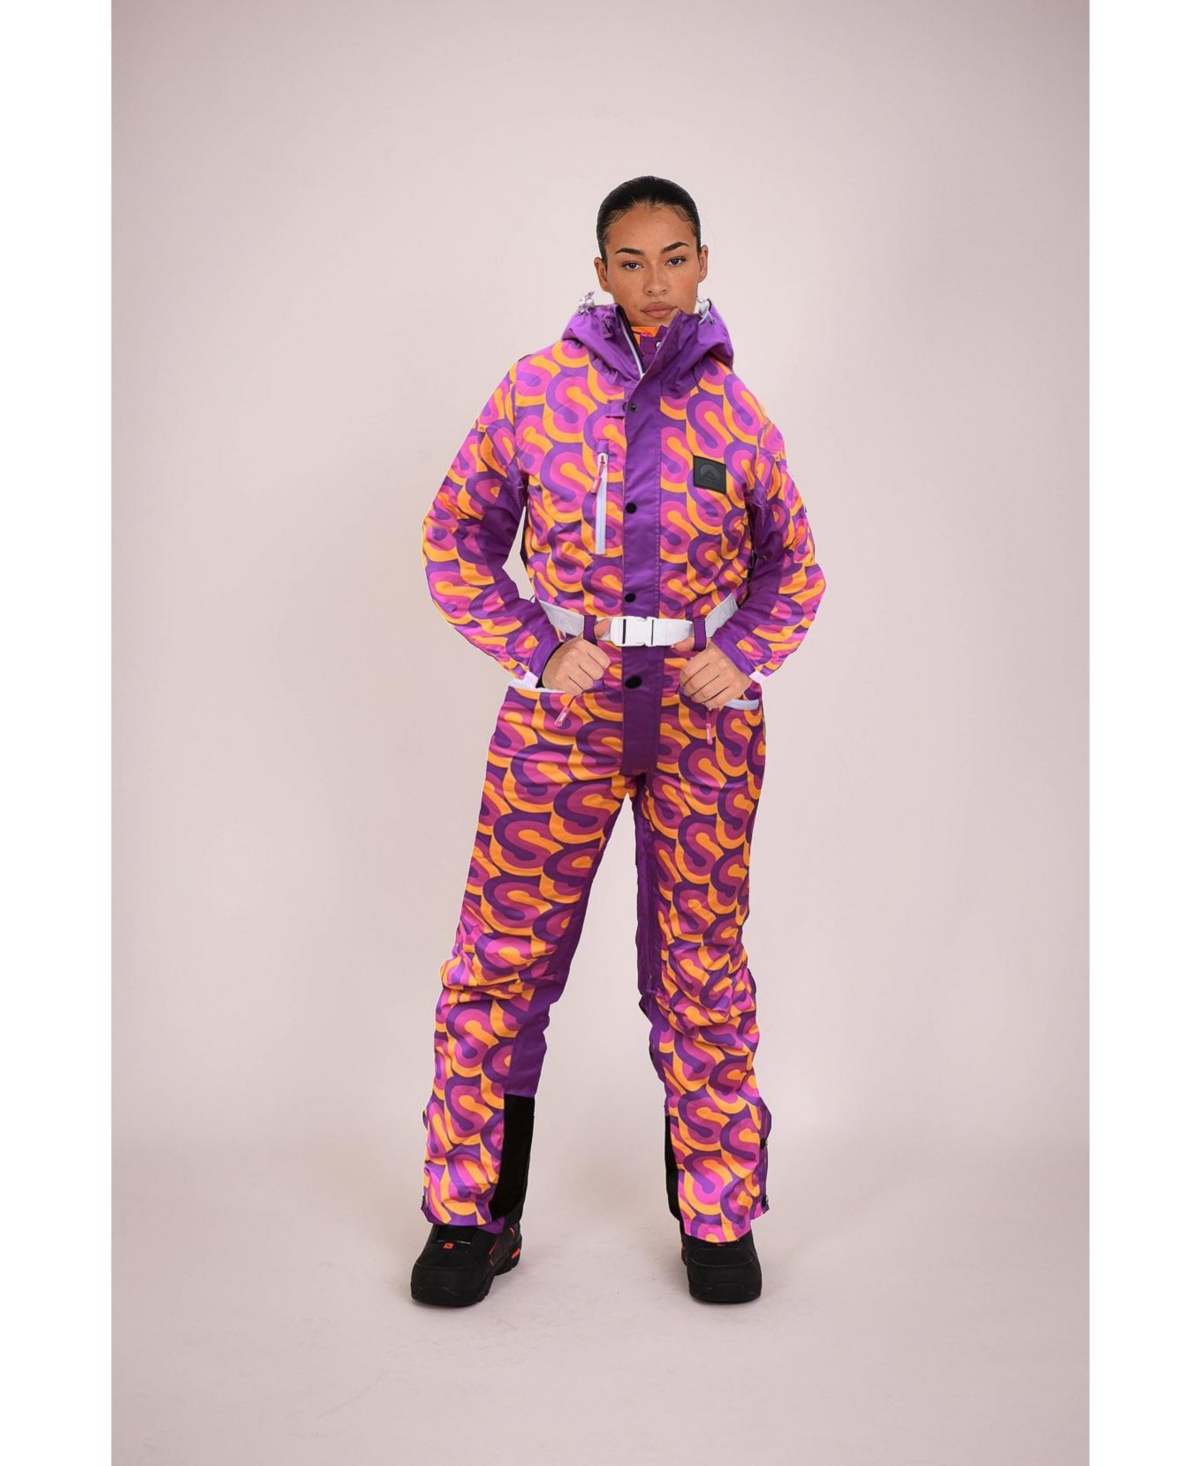 That 70's Show Curved Women's Ski Suit - Multi